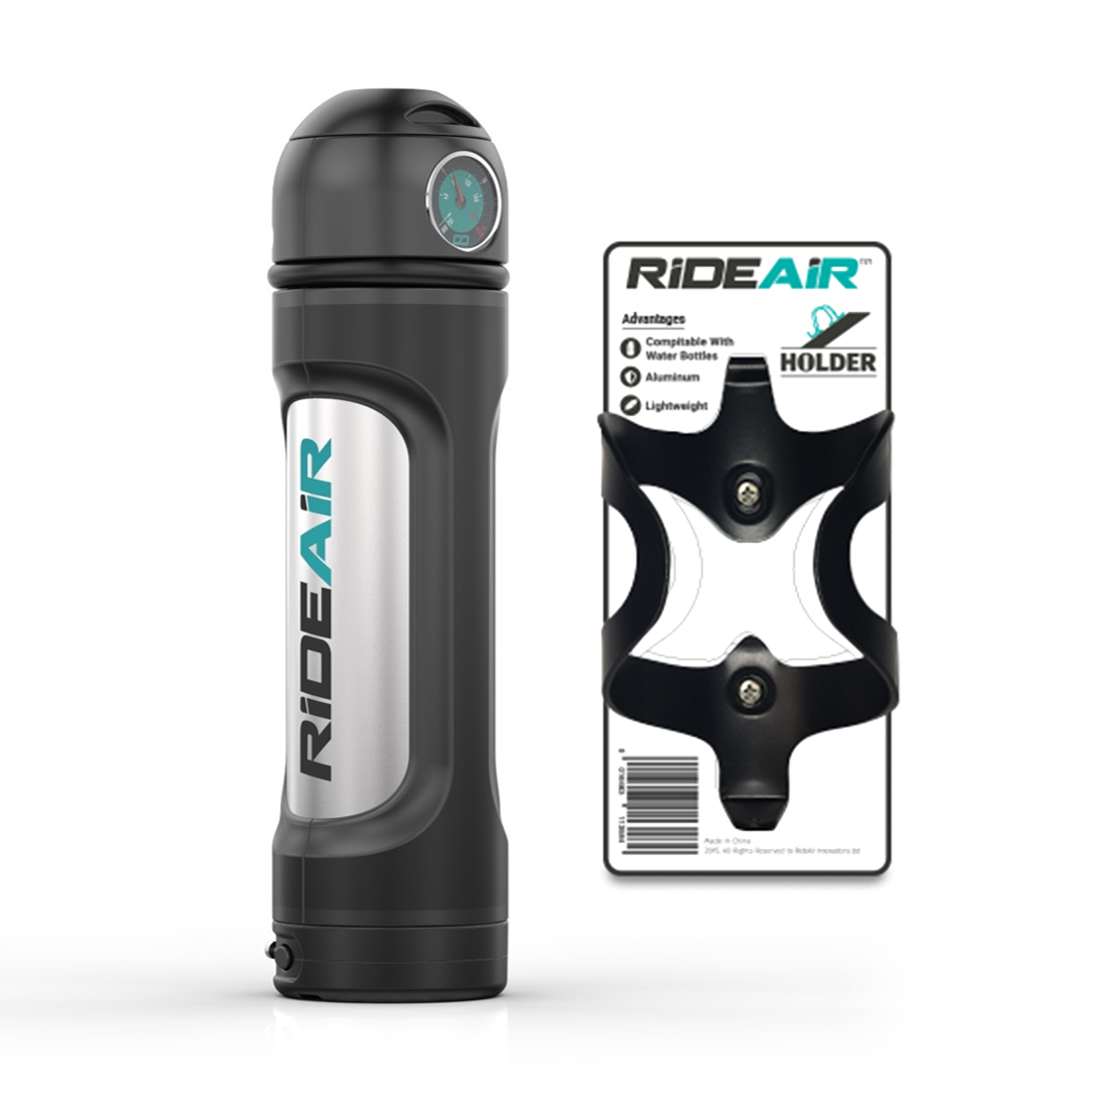 RideAir® with Lock and Holder